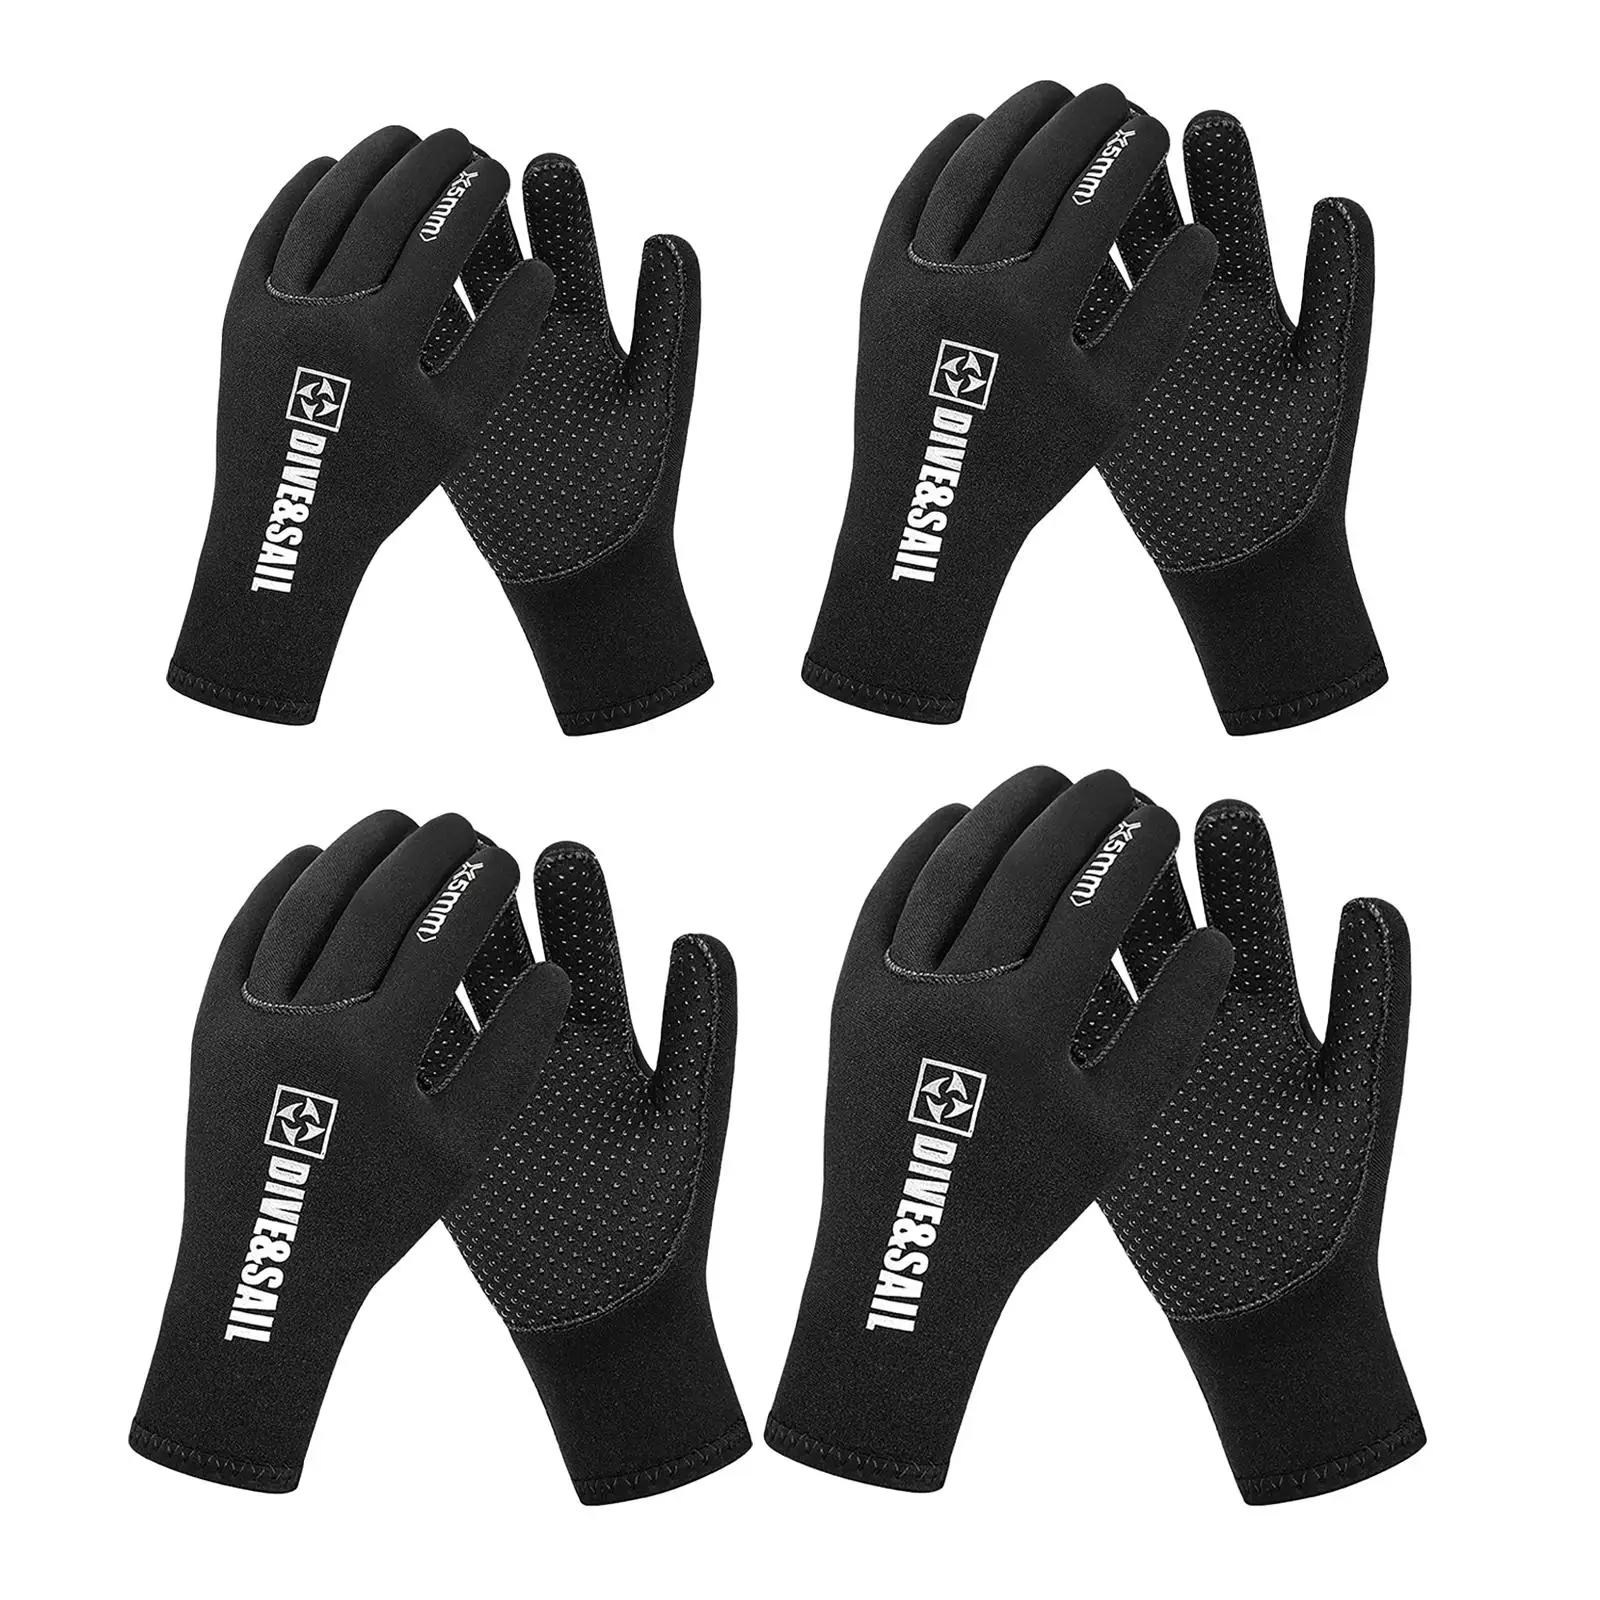 5MM Neoprene Swimming Gloves Snorkeling Equipment Anti Scratch Keep Warm Wetsuit Gloves for Swimming Spearfishing Water Sports